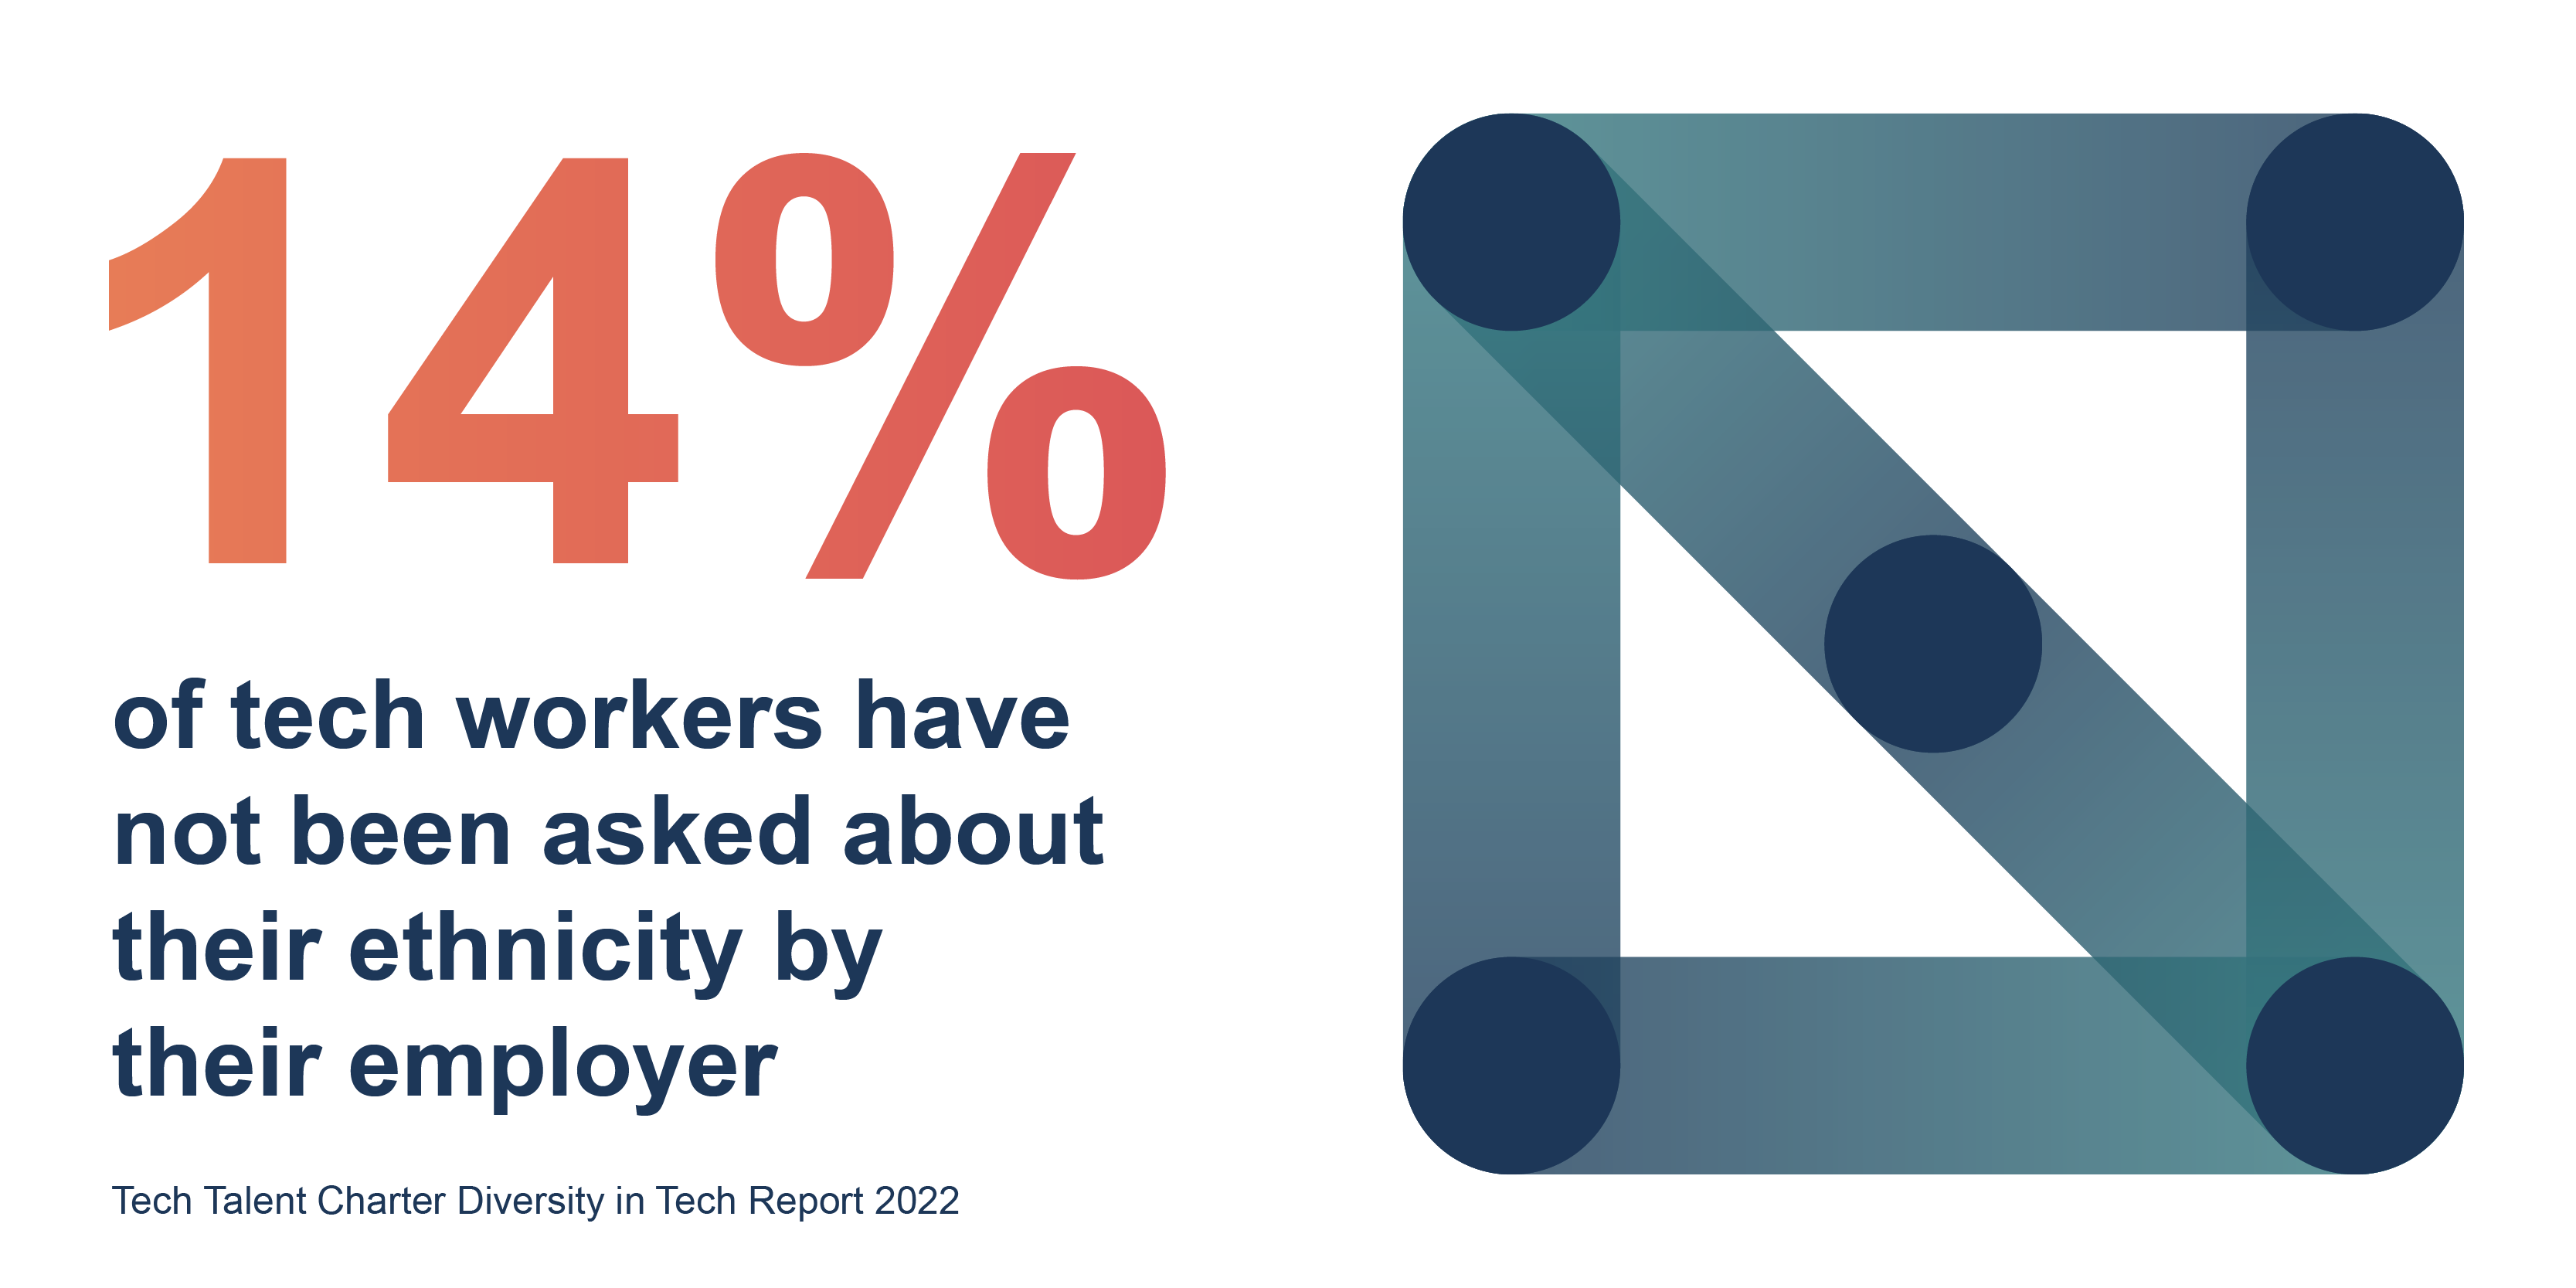 14% of tech workers have not been asked about their ethnicity by their employer